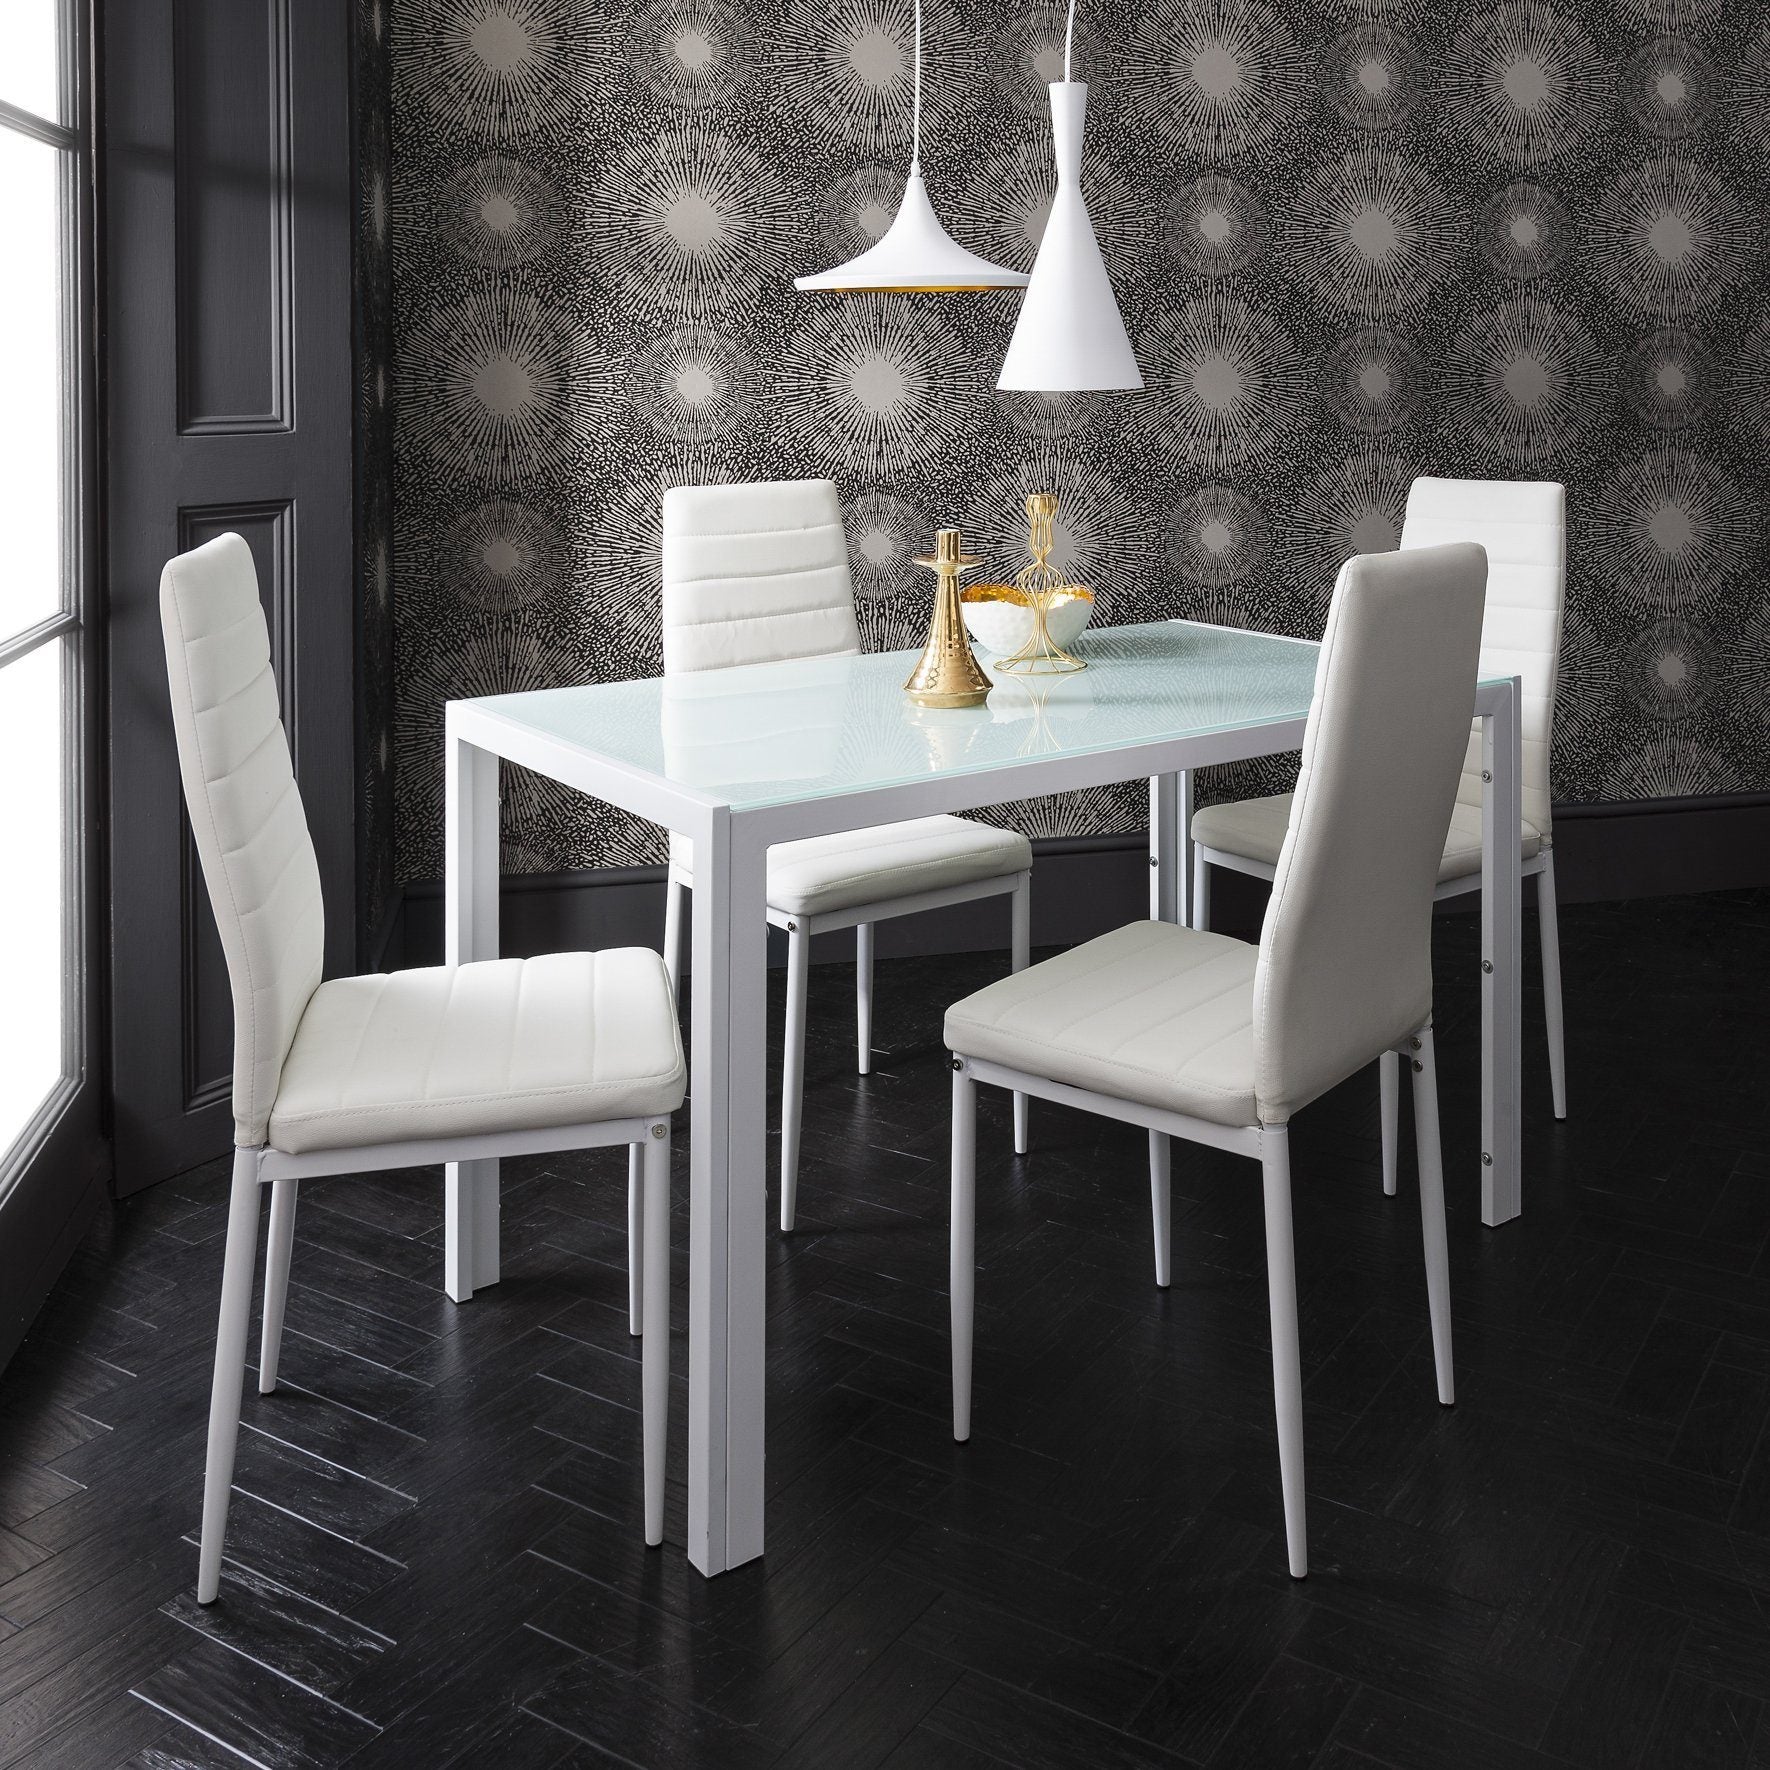 Laura James - Glass Dining Table Set and 4 Chairs Set White - Laura James